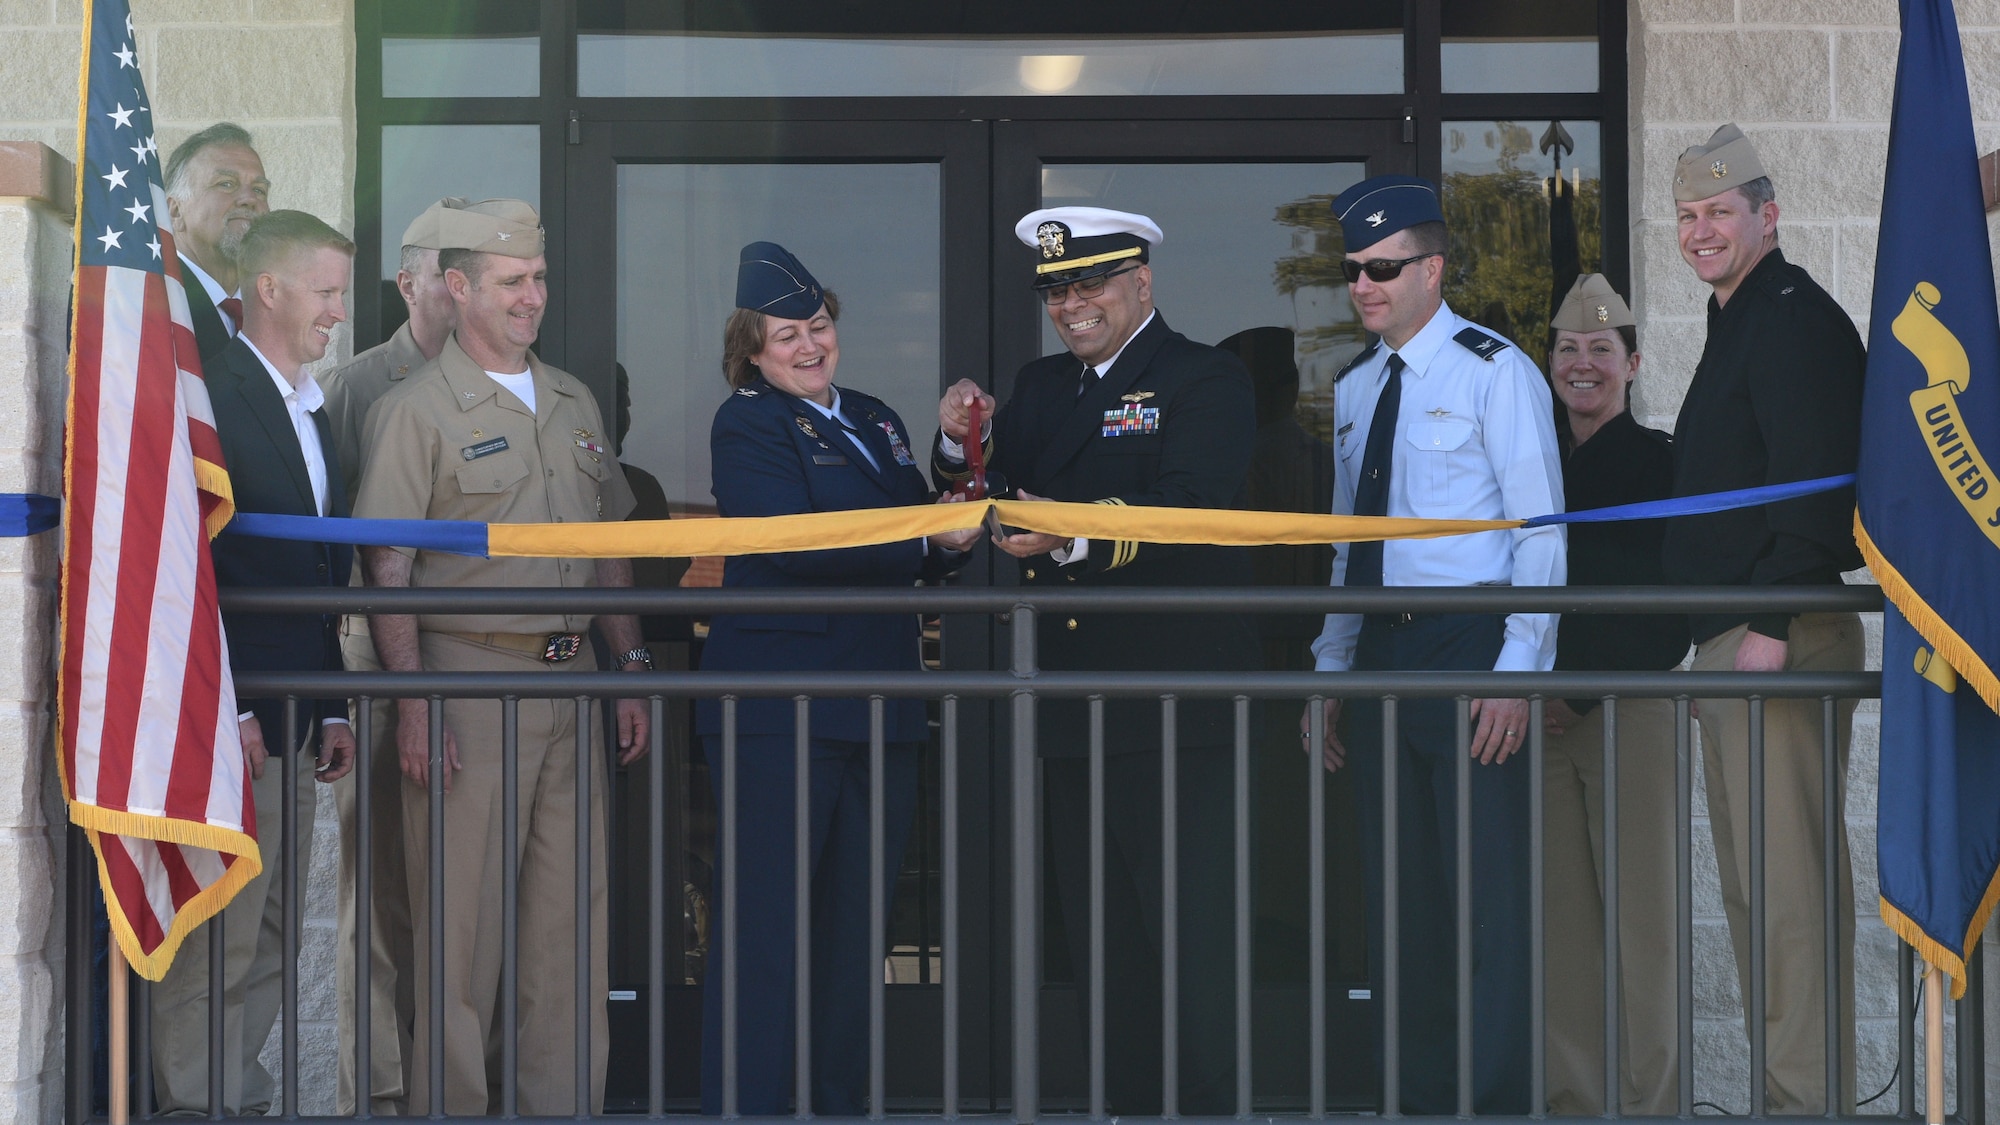 U.S. Air Force Col. Angelina Maguinness, 17th Training Wing commander, and U.S. Navy Lt. Cmdr. Nicholas Leyba Center for Information Warfare Training Command Monterey, Detachment Goodfellow Headquarters commander, cut the ribbon at the Navy Ribbon Cutting Ceremony at Goodfellow Air Force Base Feb. 2, 2024. This project signifies the completion of the newest building on base and the start of a more extensive update to Goodfellow’s infrastructure. (U.S. Air Force photo by 2nd Lt. Kayunna Holt)